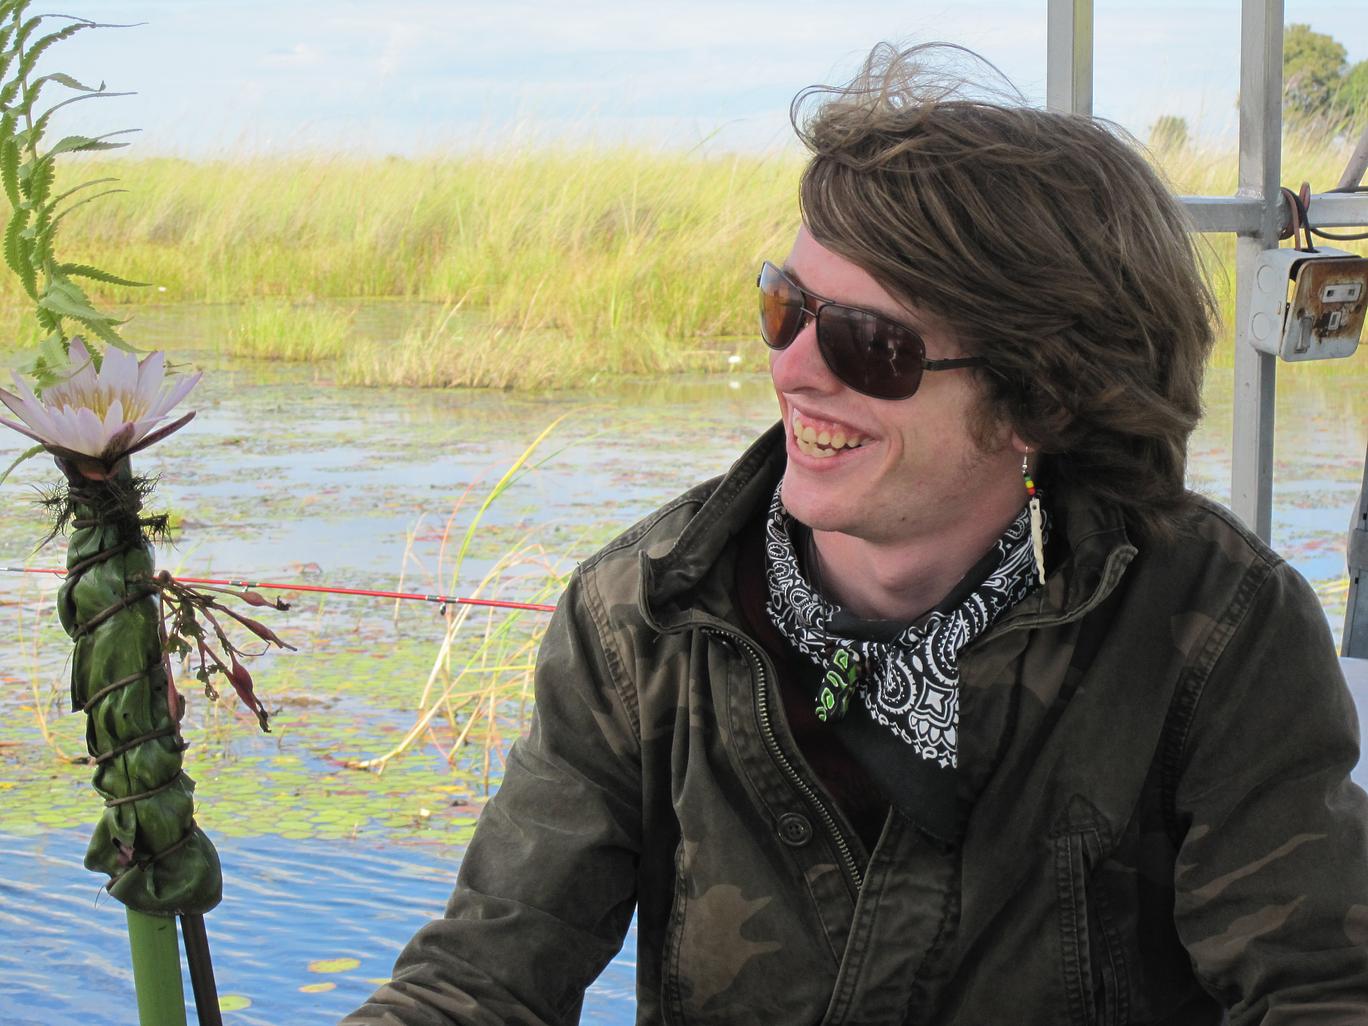 Seth Reichman smiles on an airboat with marsh behind him.